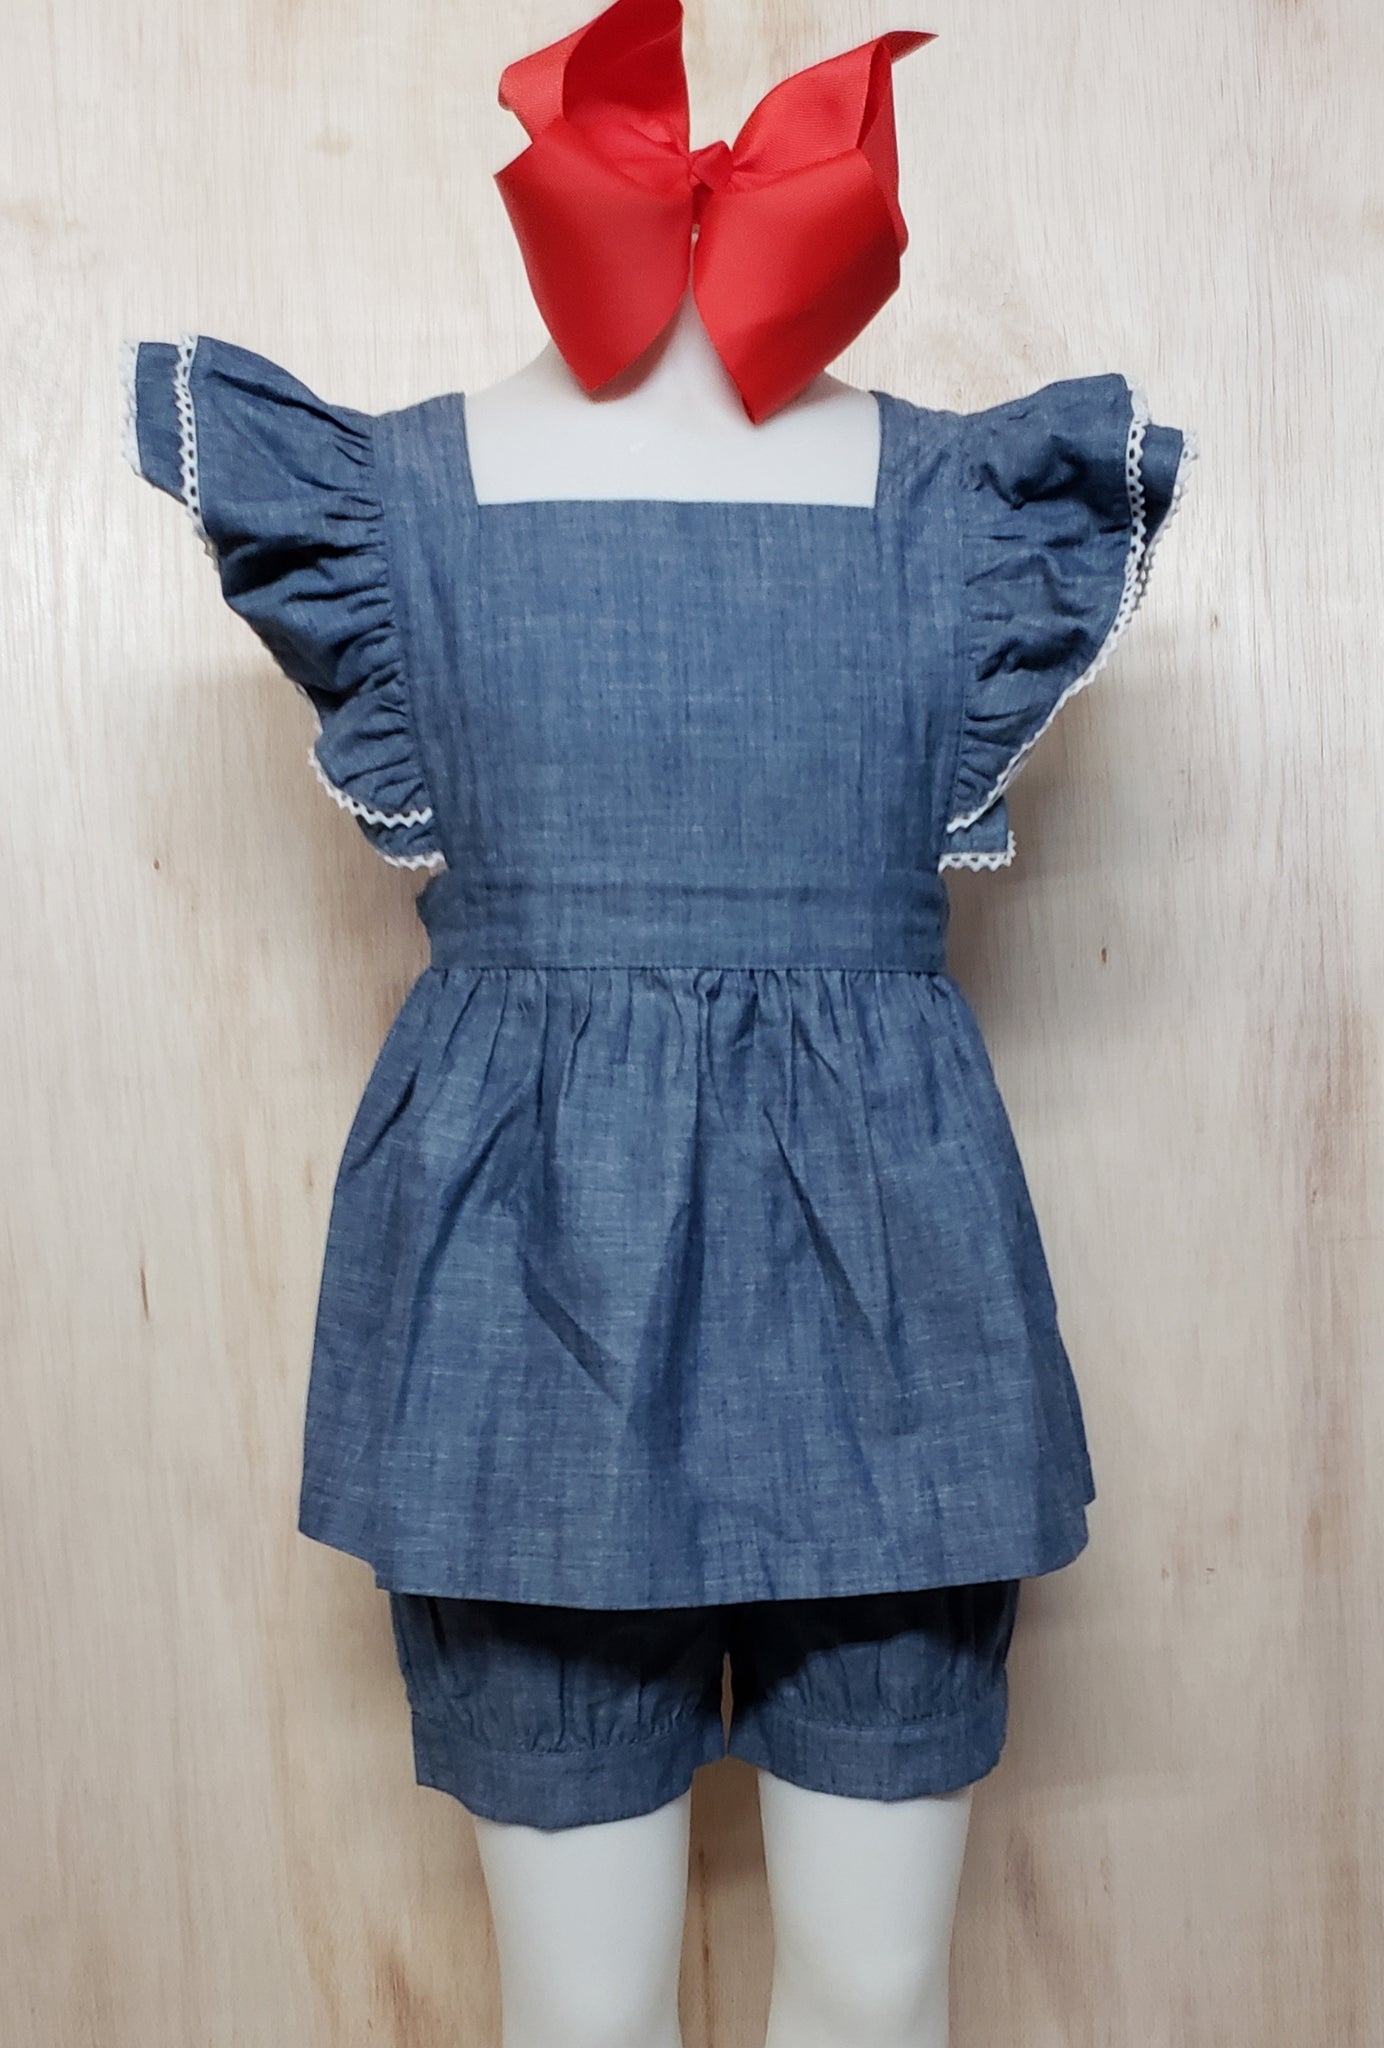 Flutter Sleeve Chambray - Momma G's Children's Boutique, Screen Printing, Embroidery & More